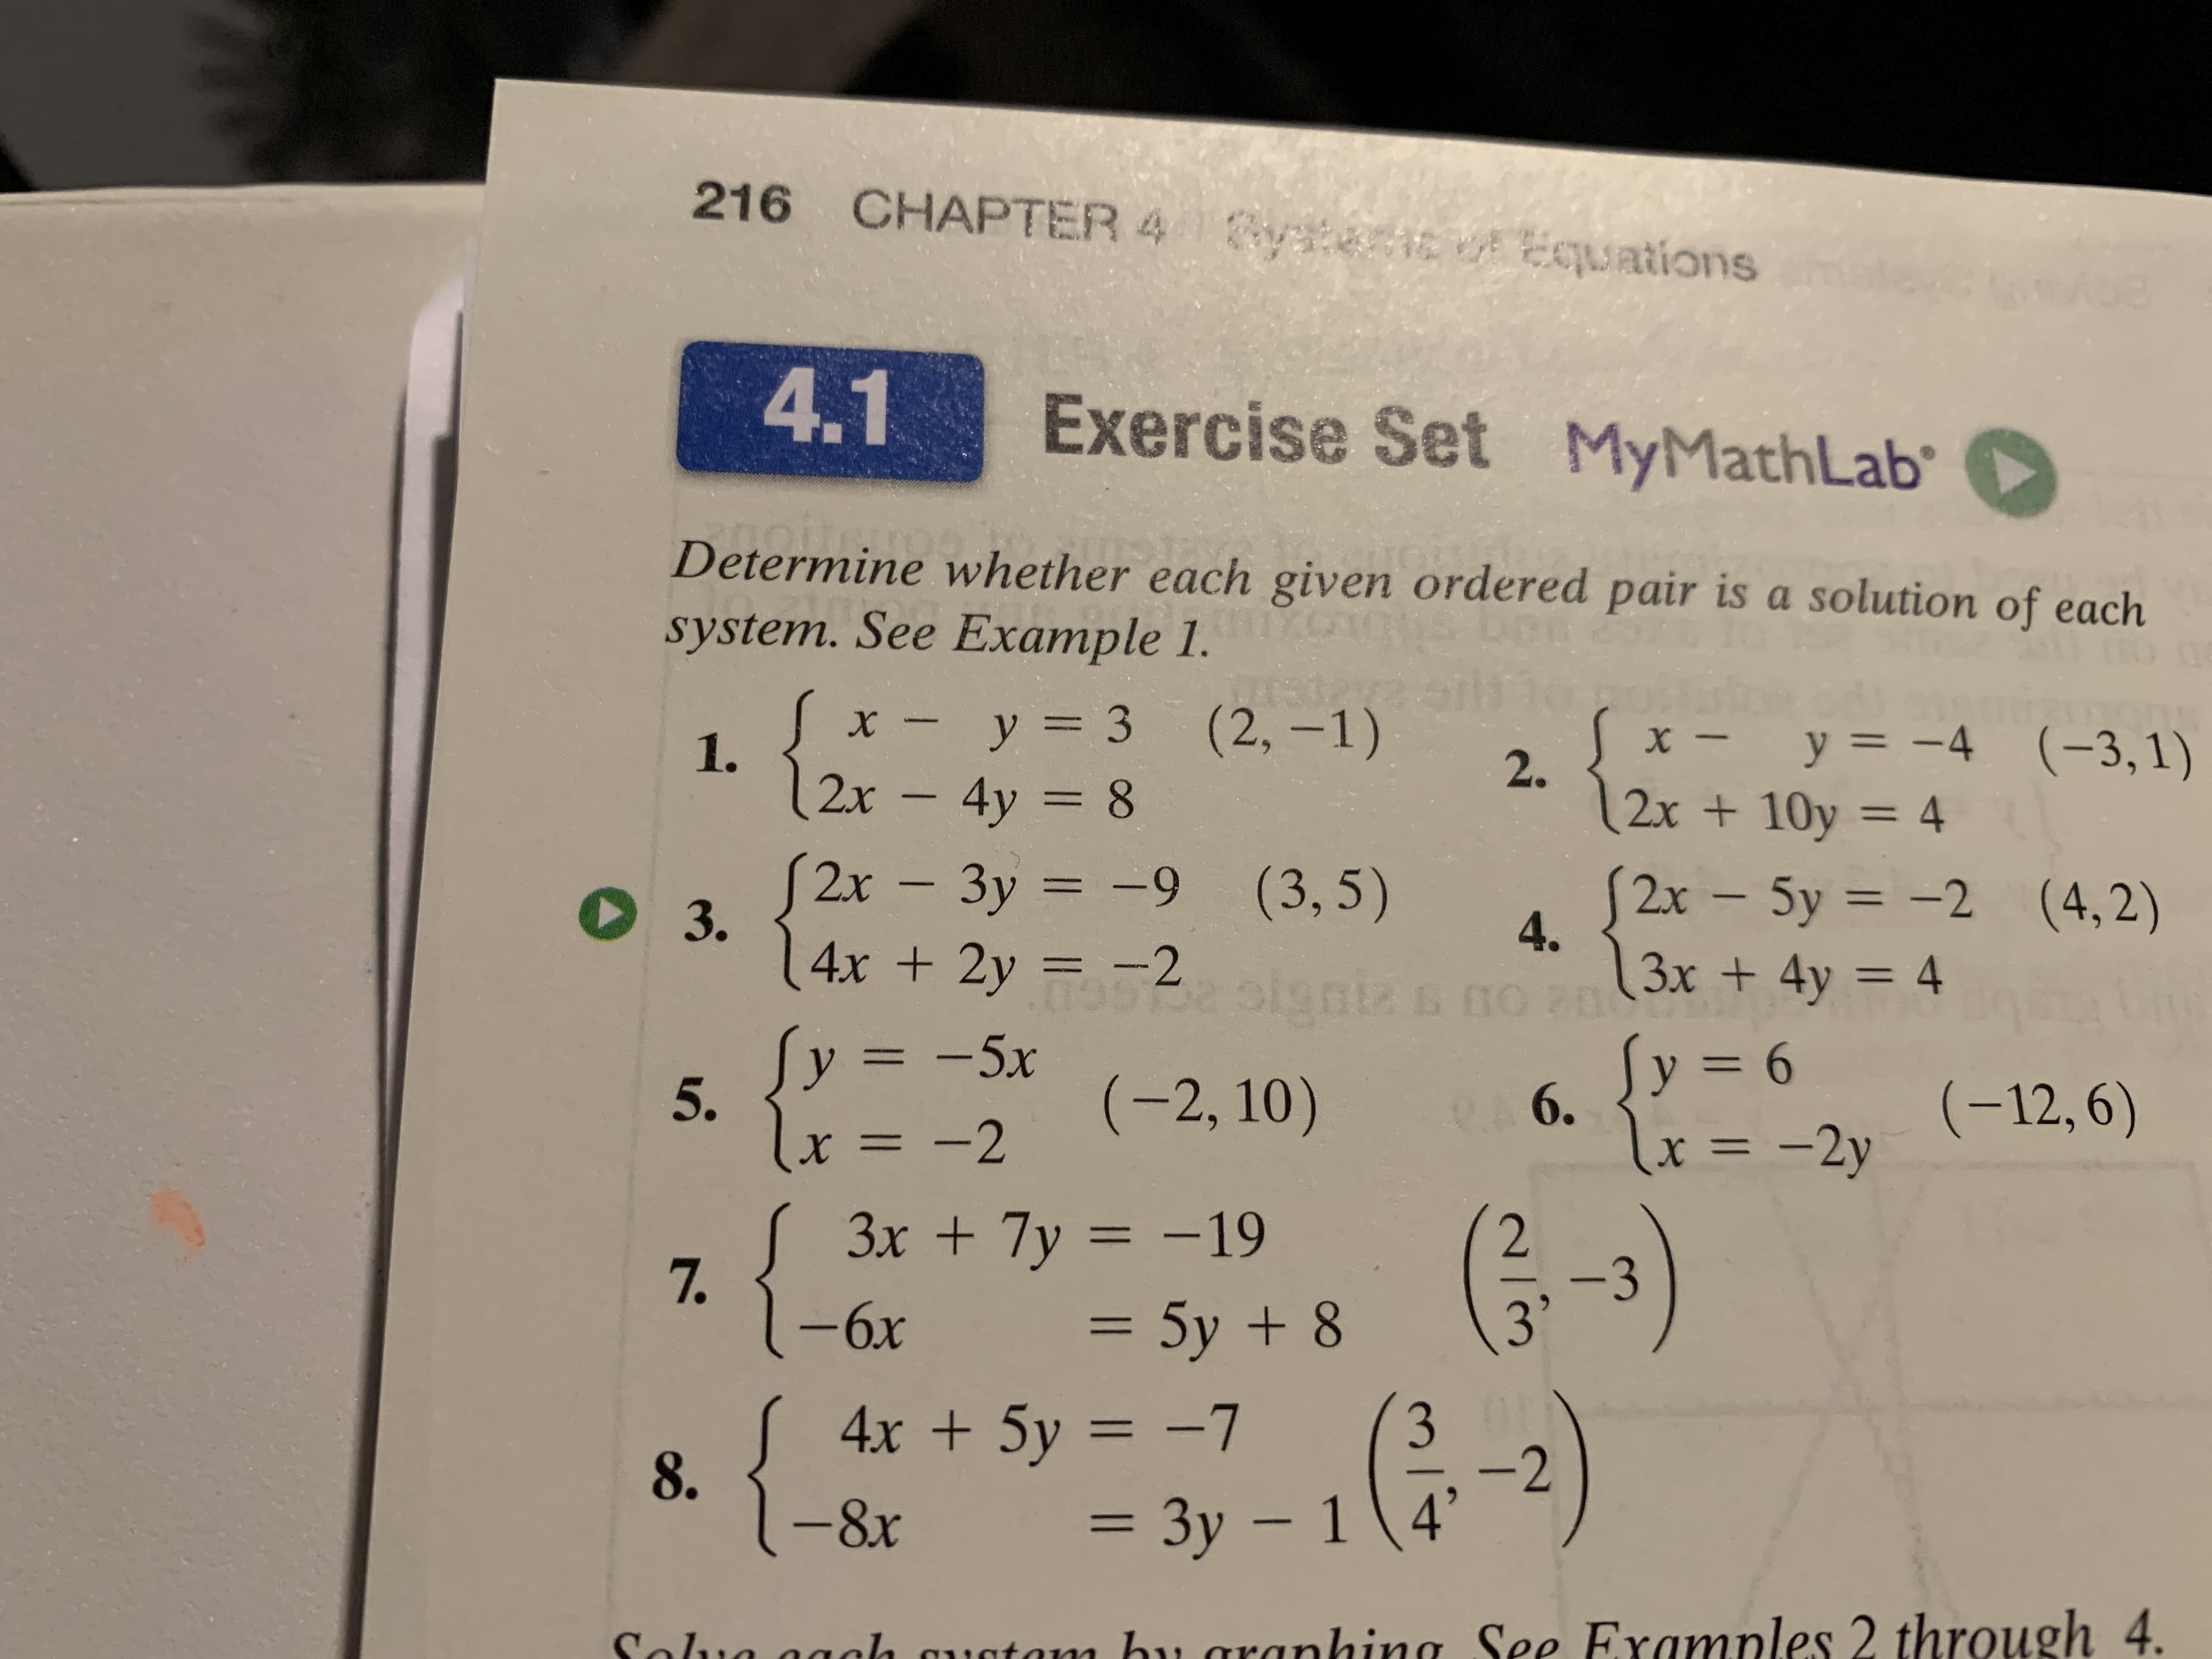 216 CHAPTER 4
Equations
4.1
Exercise Set MyMathLab
Determine whether each given ordered pair is a solution of each
system. See Example 1.
YO
{2
(2, -1)
y=3
(-3,1)
х
y = 4
1.
2
2x+ 10y = 4
2x- 4y 8
f2x - 3y -
1
Зу 3
J2x - 5y =-1
(3, 5)
Sy =-2
(4,2)
3.
4.
3x+ 4y = 4
4x + 2y = -2
ie ta sno
fy = -5x
5.
lx = -2
Sy= 6
(-2, 10)
(-12,6)
6.
Lx = -2y
3x+7y =-19
7
-6x
{
{
2
33
5y+8
=
3
-2
= 3y - 1 4
4x + 5y = -7
8.
-8x
Зу —
mntam bu aranhing See Examnles 2 through 4.
Solua
